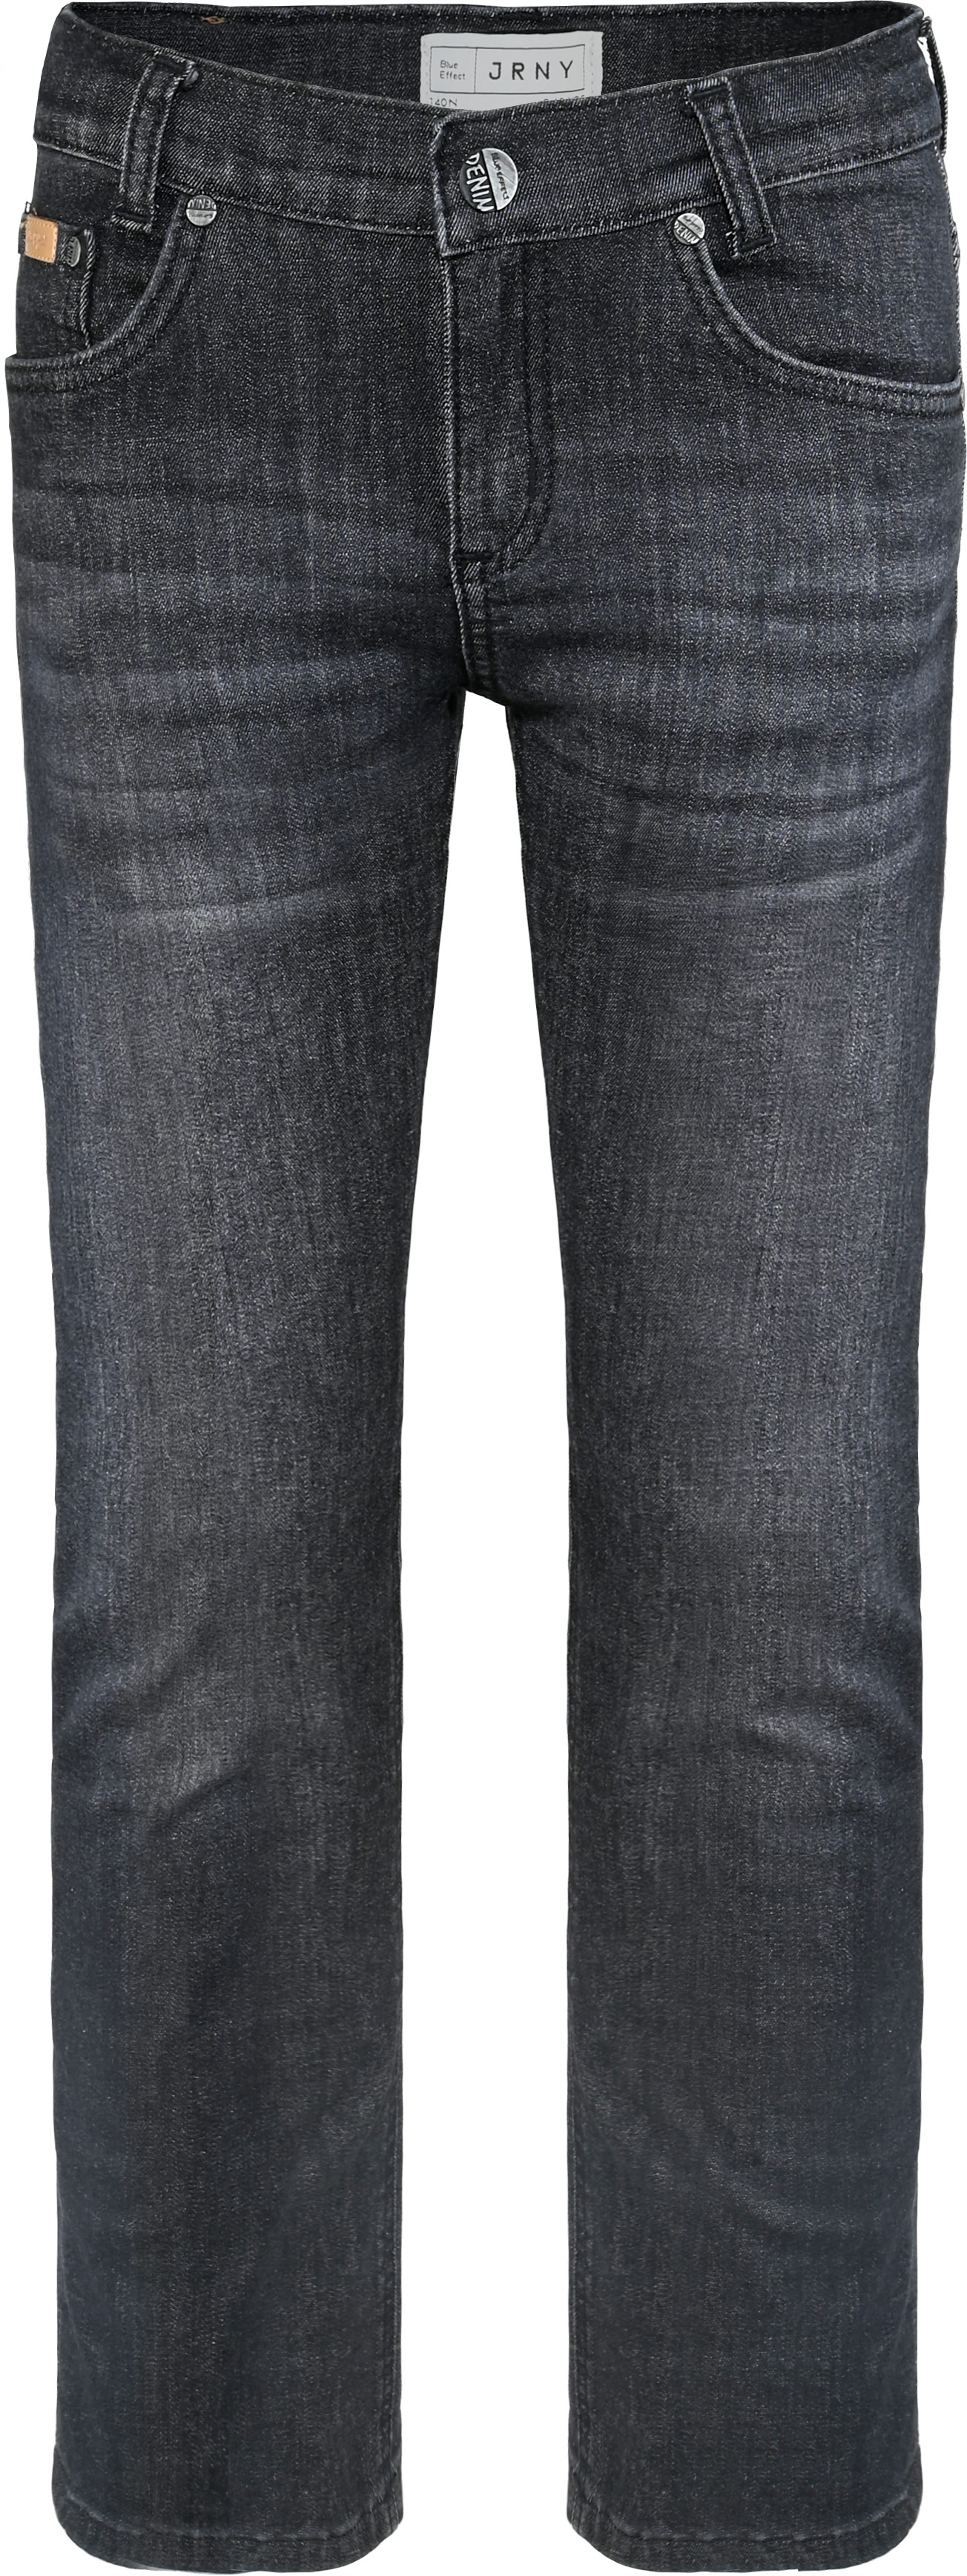 2833-JRNY Boys Relaxed Jeans available in Slim,Normal,Wide